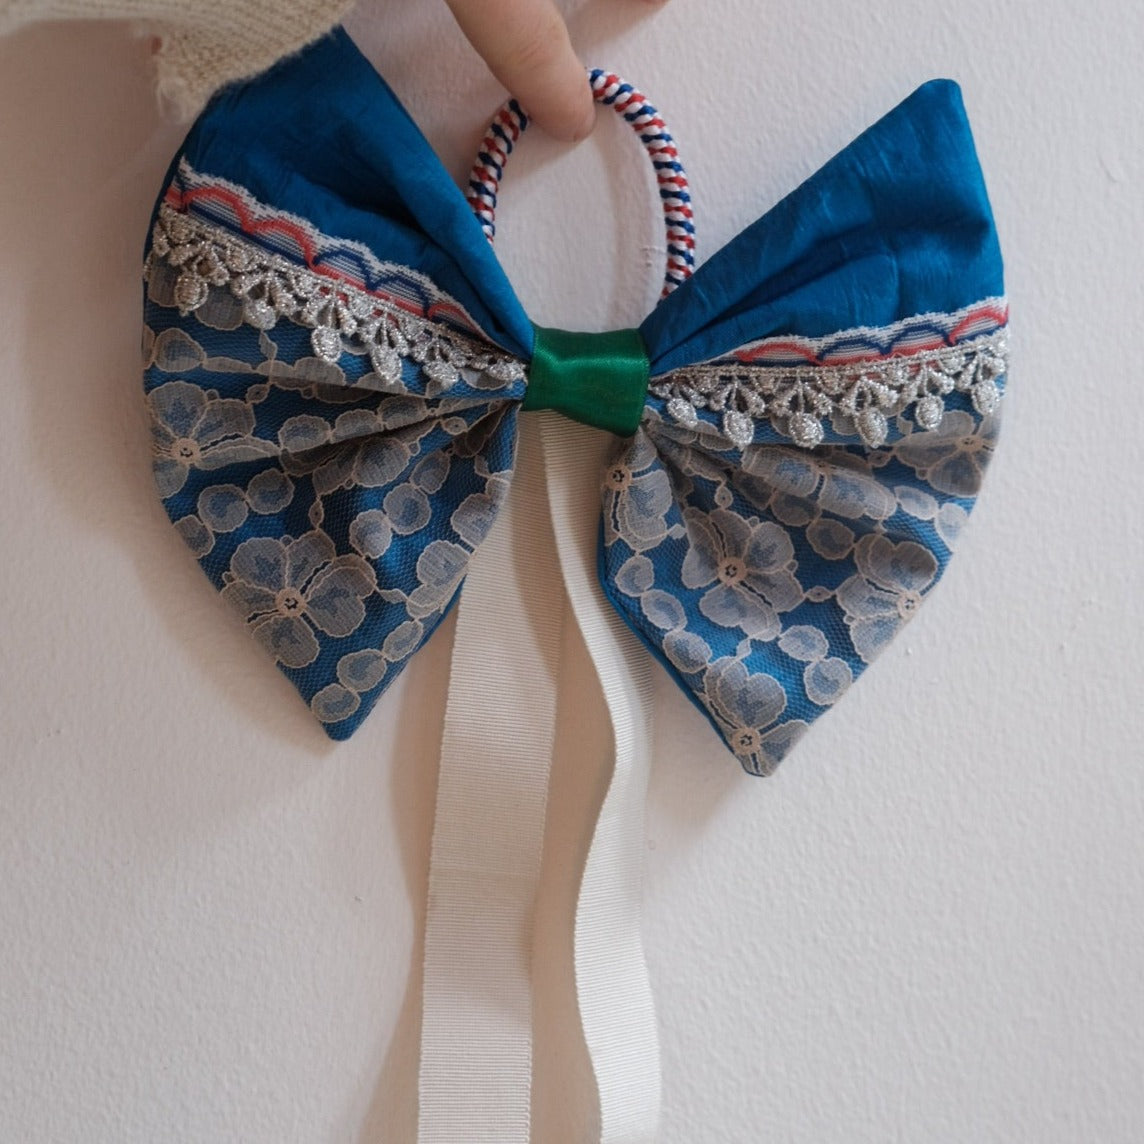 Hair accessories • Bow • Handmade • Blue and Lace